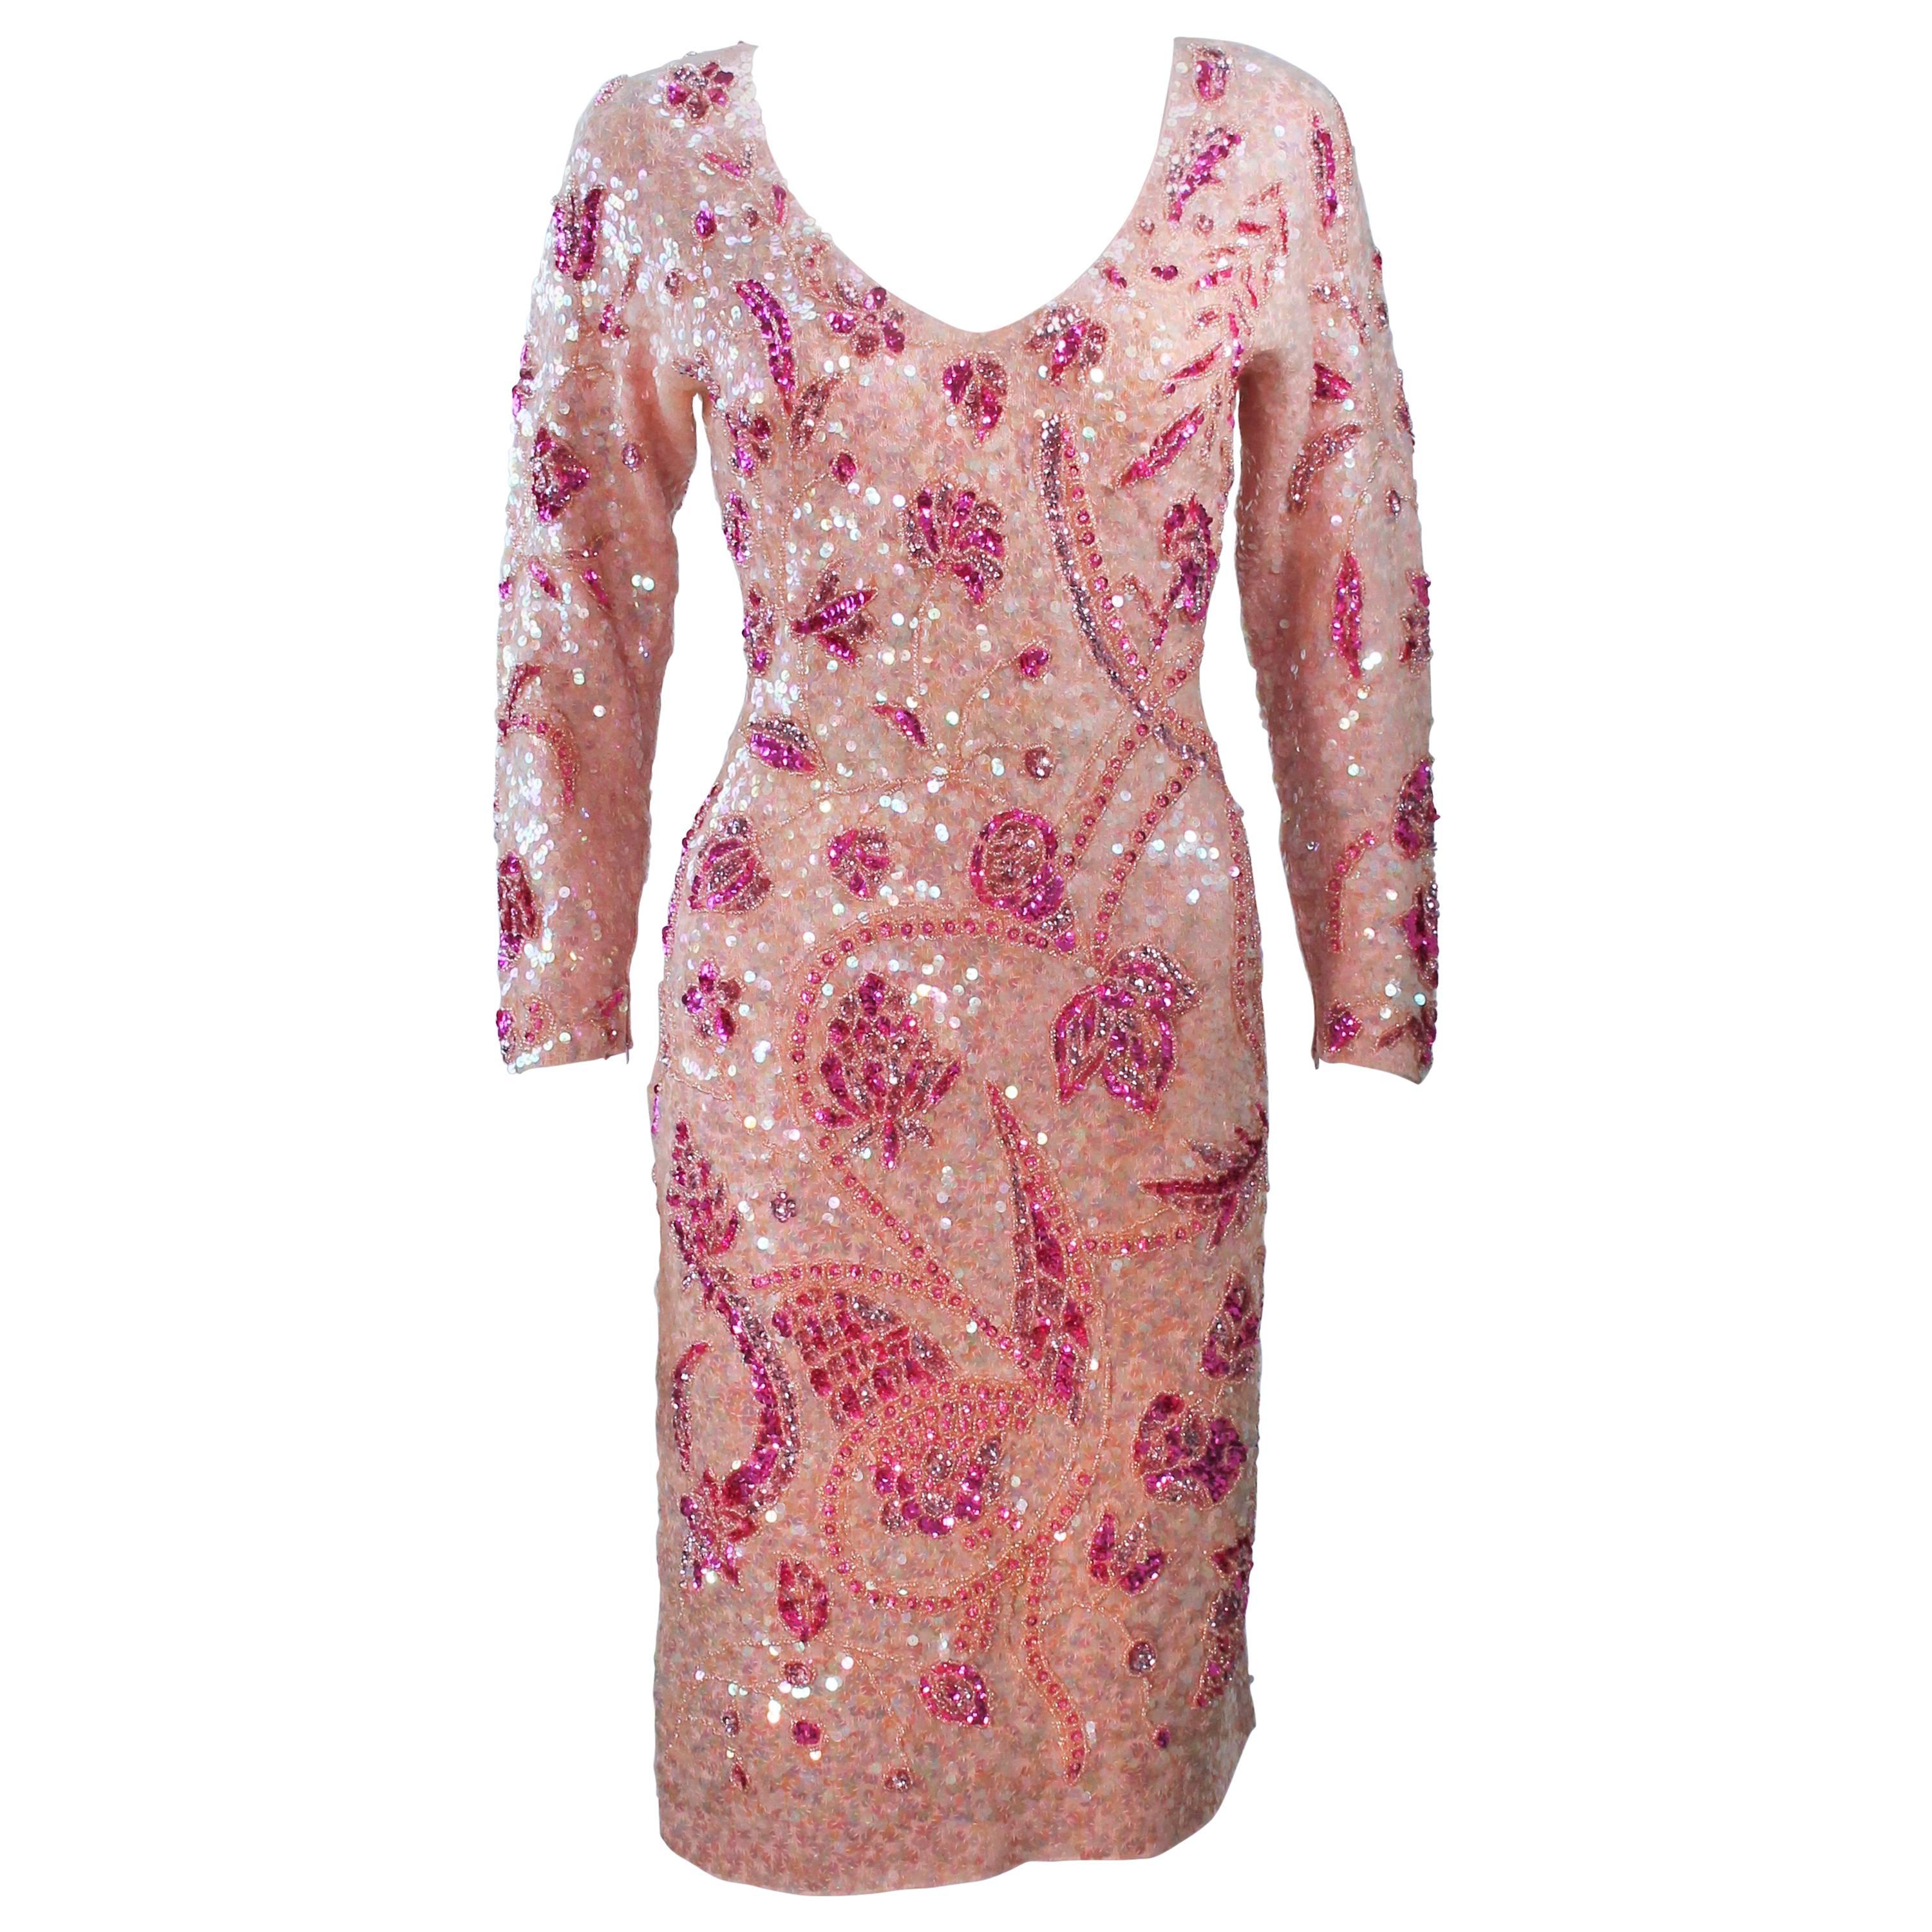 GENE SHELLY Pink Stretch Knit Beaded Wool Cocktail Dress Size 8-10 For Sale